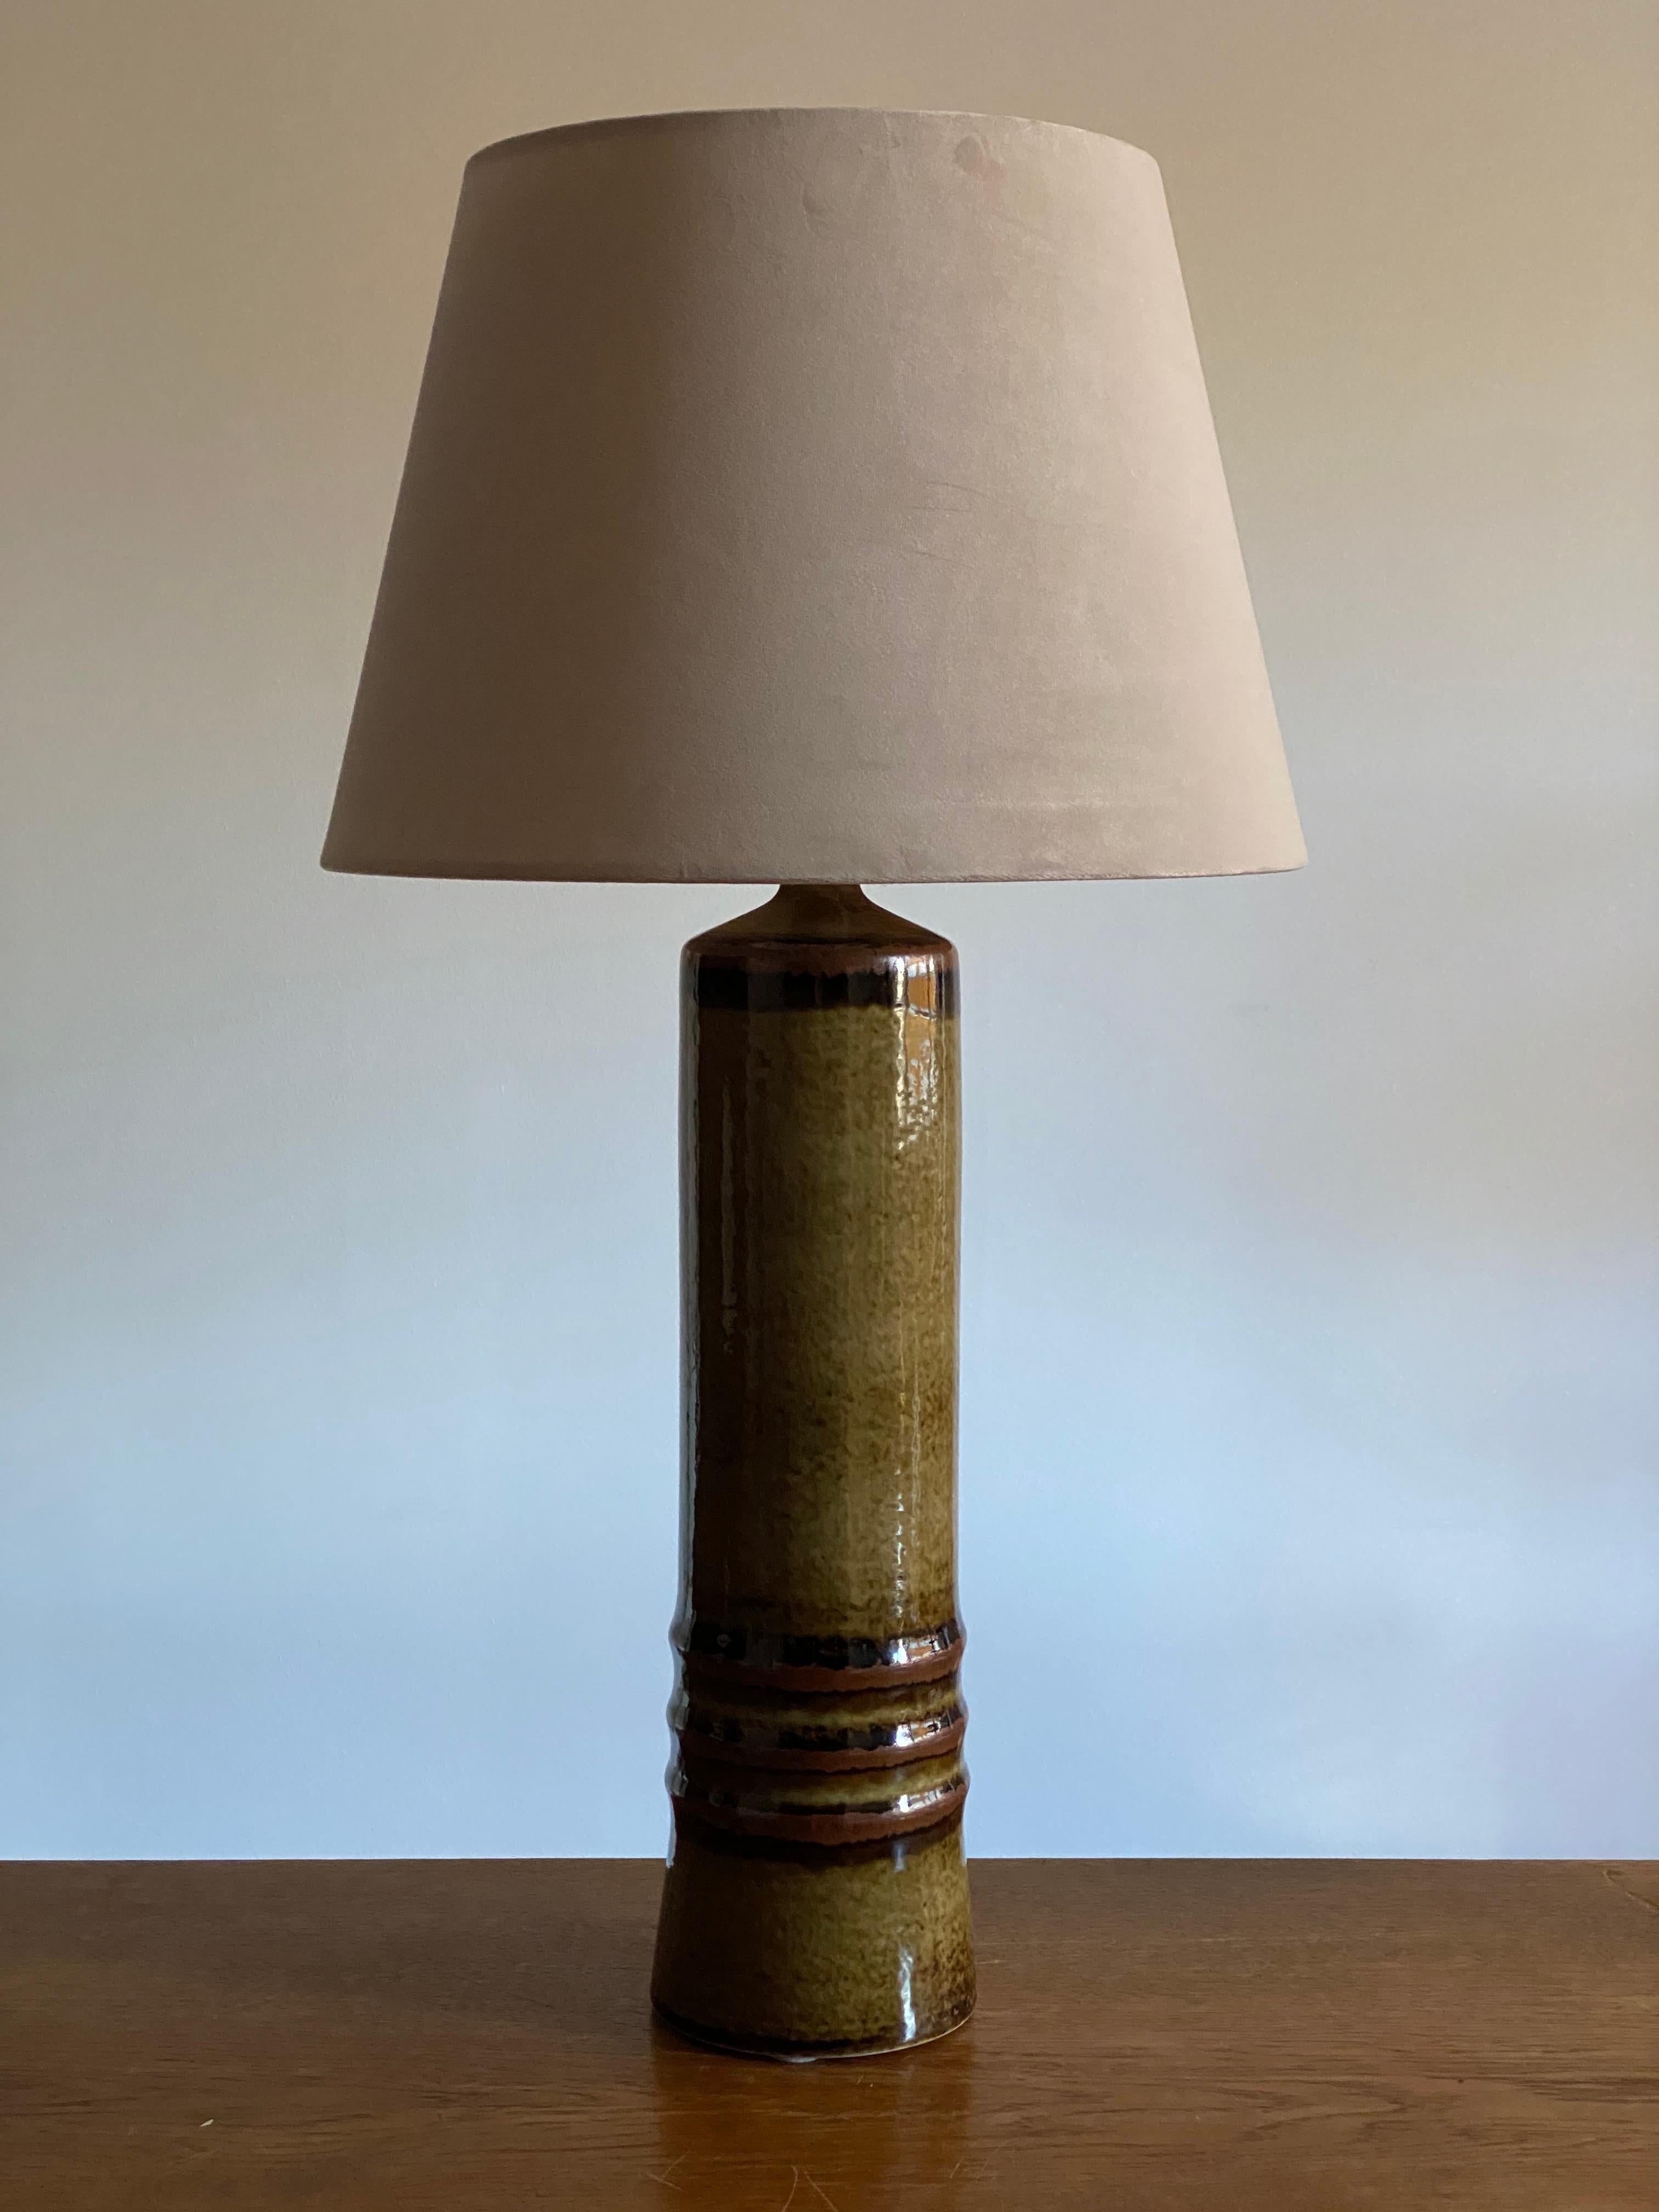 A large and sculptural table lamp, designed by Olle Alberius and produced by Rörstrand. Marked. Features a sculptural form and a highly artistic green / black / brown glaze. 

Lampshade attached is for illustration. Sold without lampshade. Stated